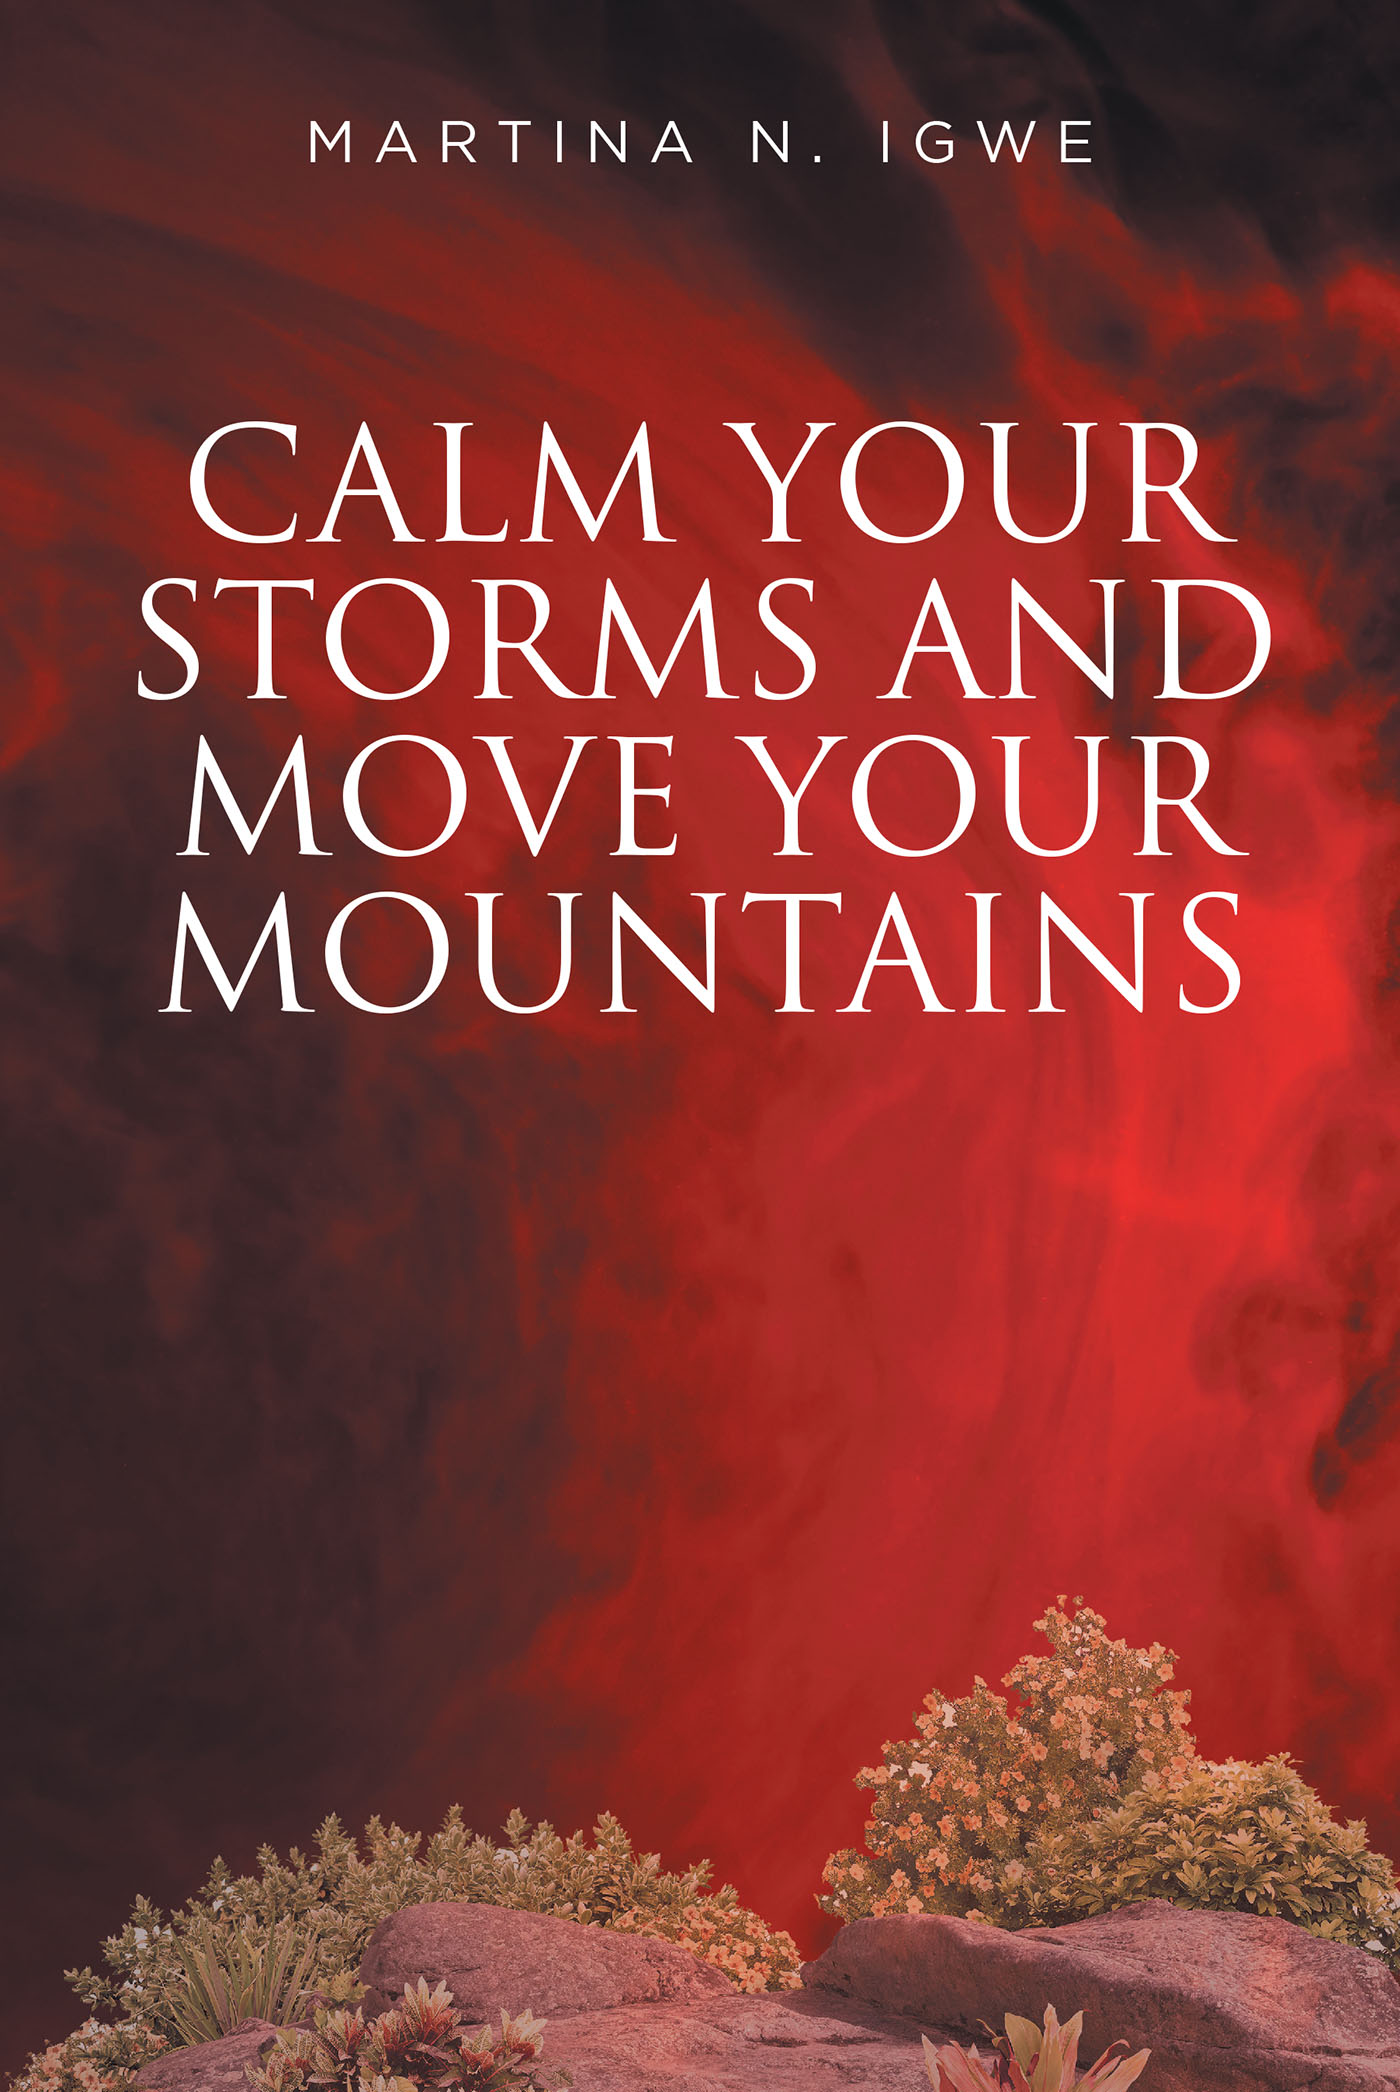 Martina Igwe’s New Book, "Calm Your Storms and Move Your Mountains," is a Beacon of Hope That Uses Scripture to Inspire and Uplift Readers Through God’s Teachings